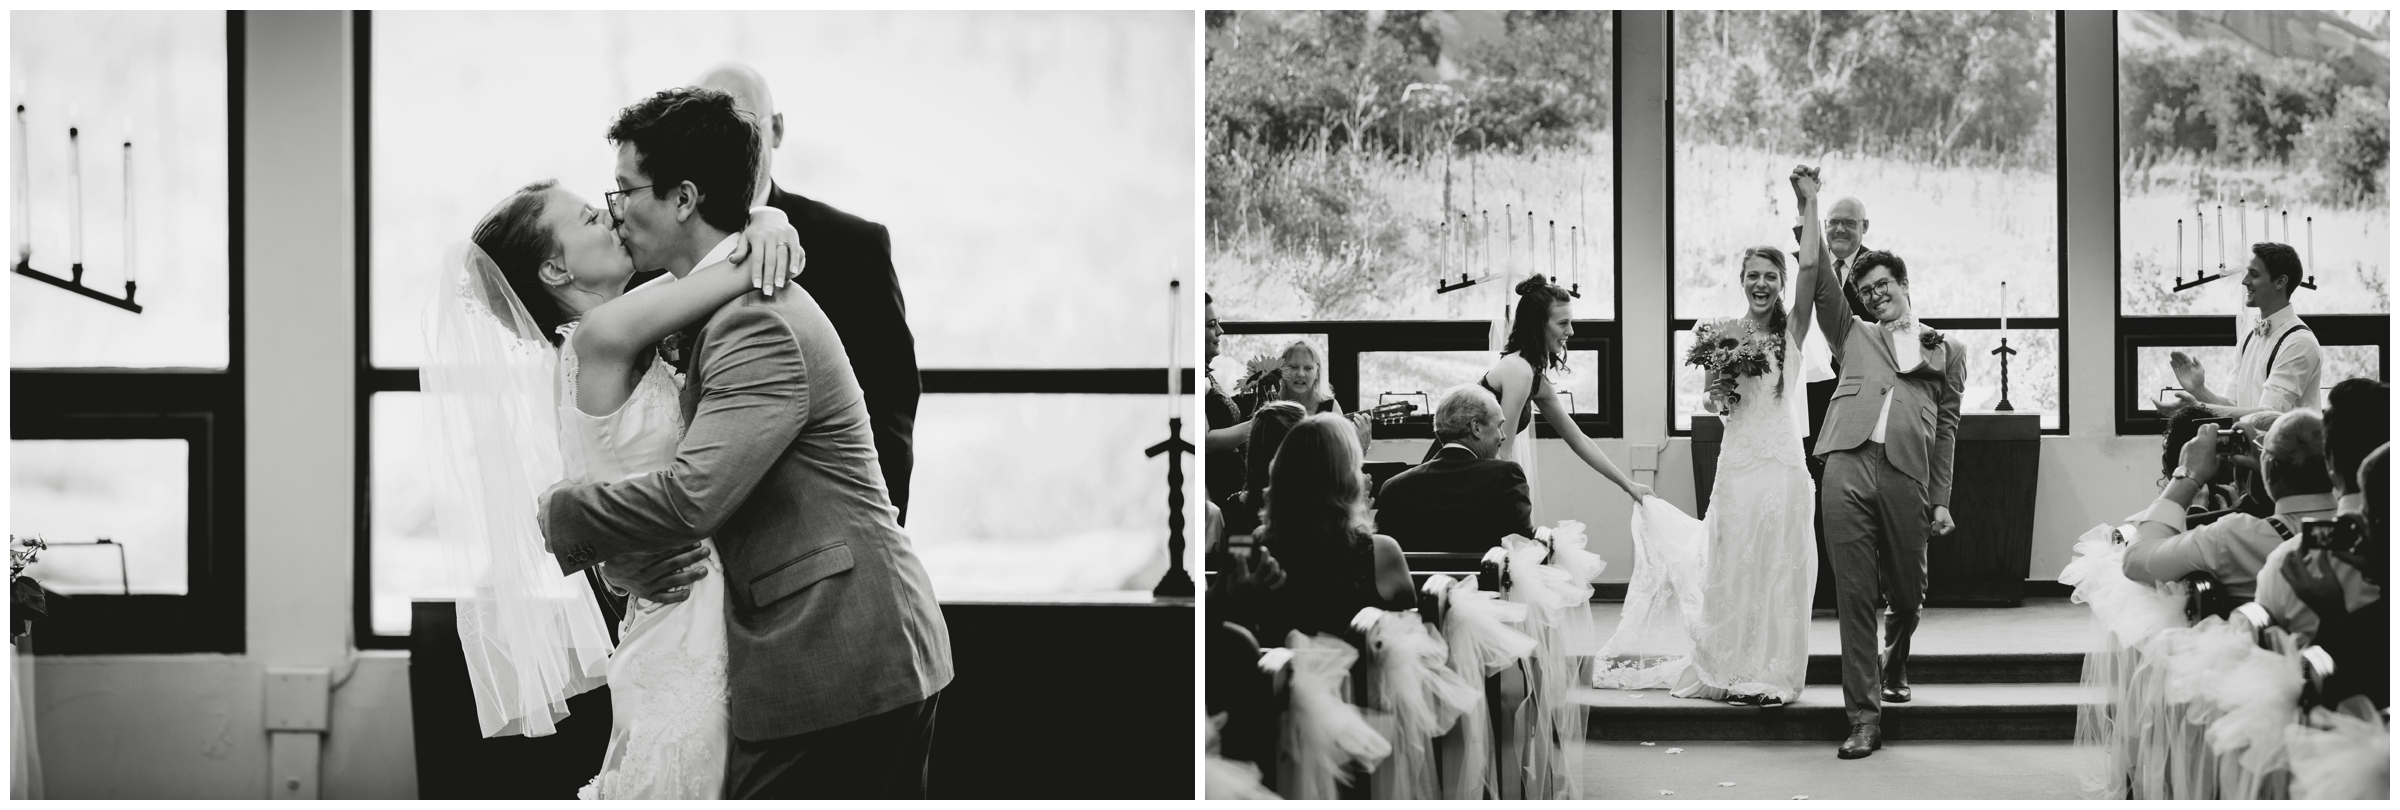 first kiss at Red Rocks Chapel Colorado wedding ceremony 